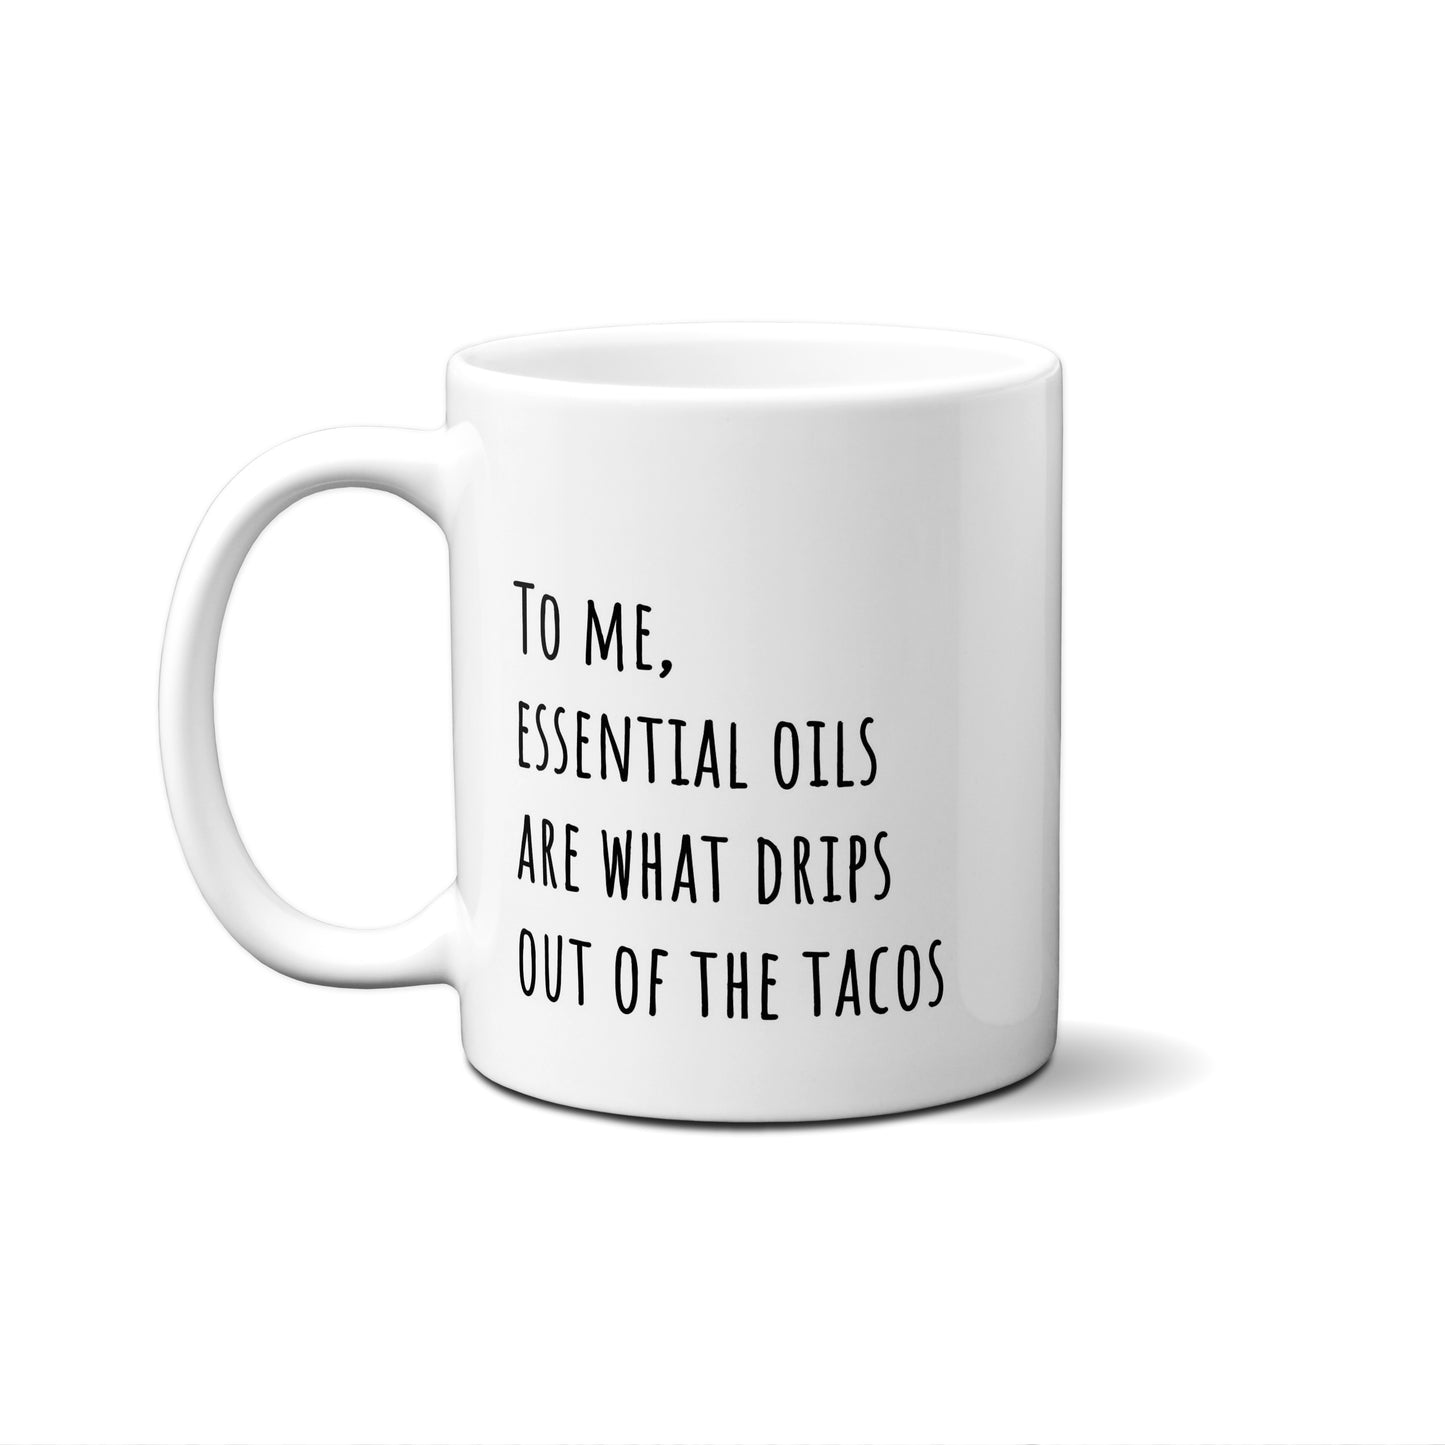 To Me, Essential Oils Are What Drips Out Of The Tacos Quote Mug